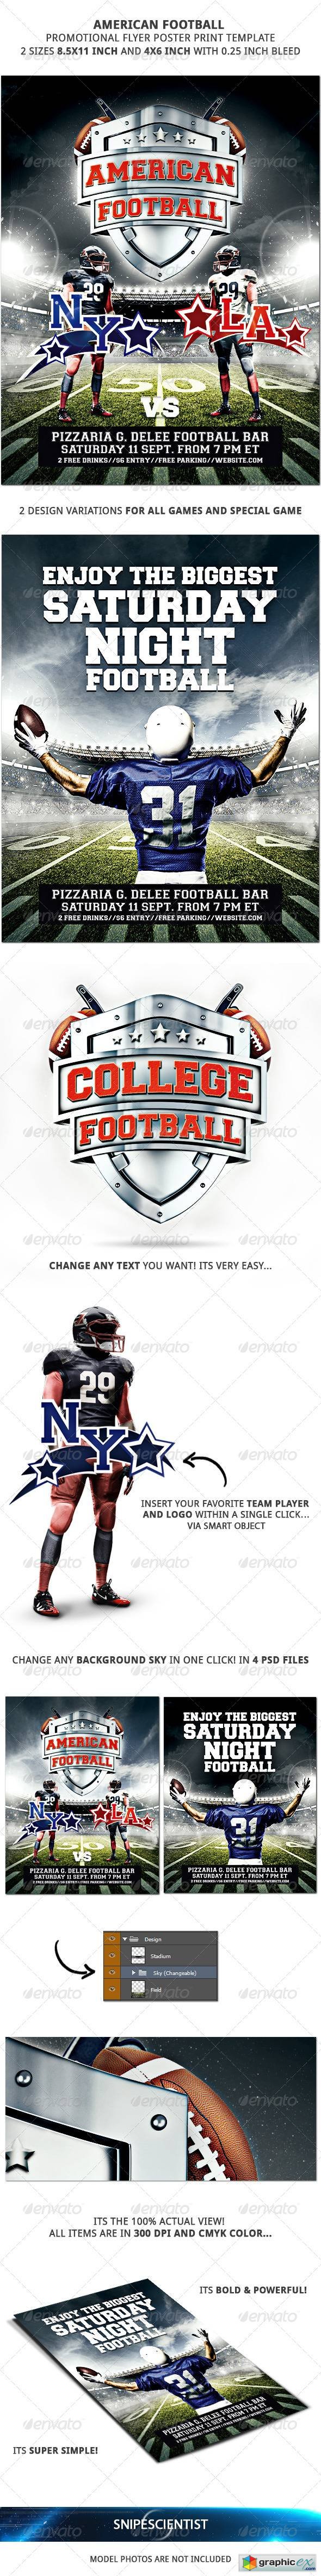 American Football Promotional Flyer Poster 2 Sizes